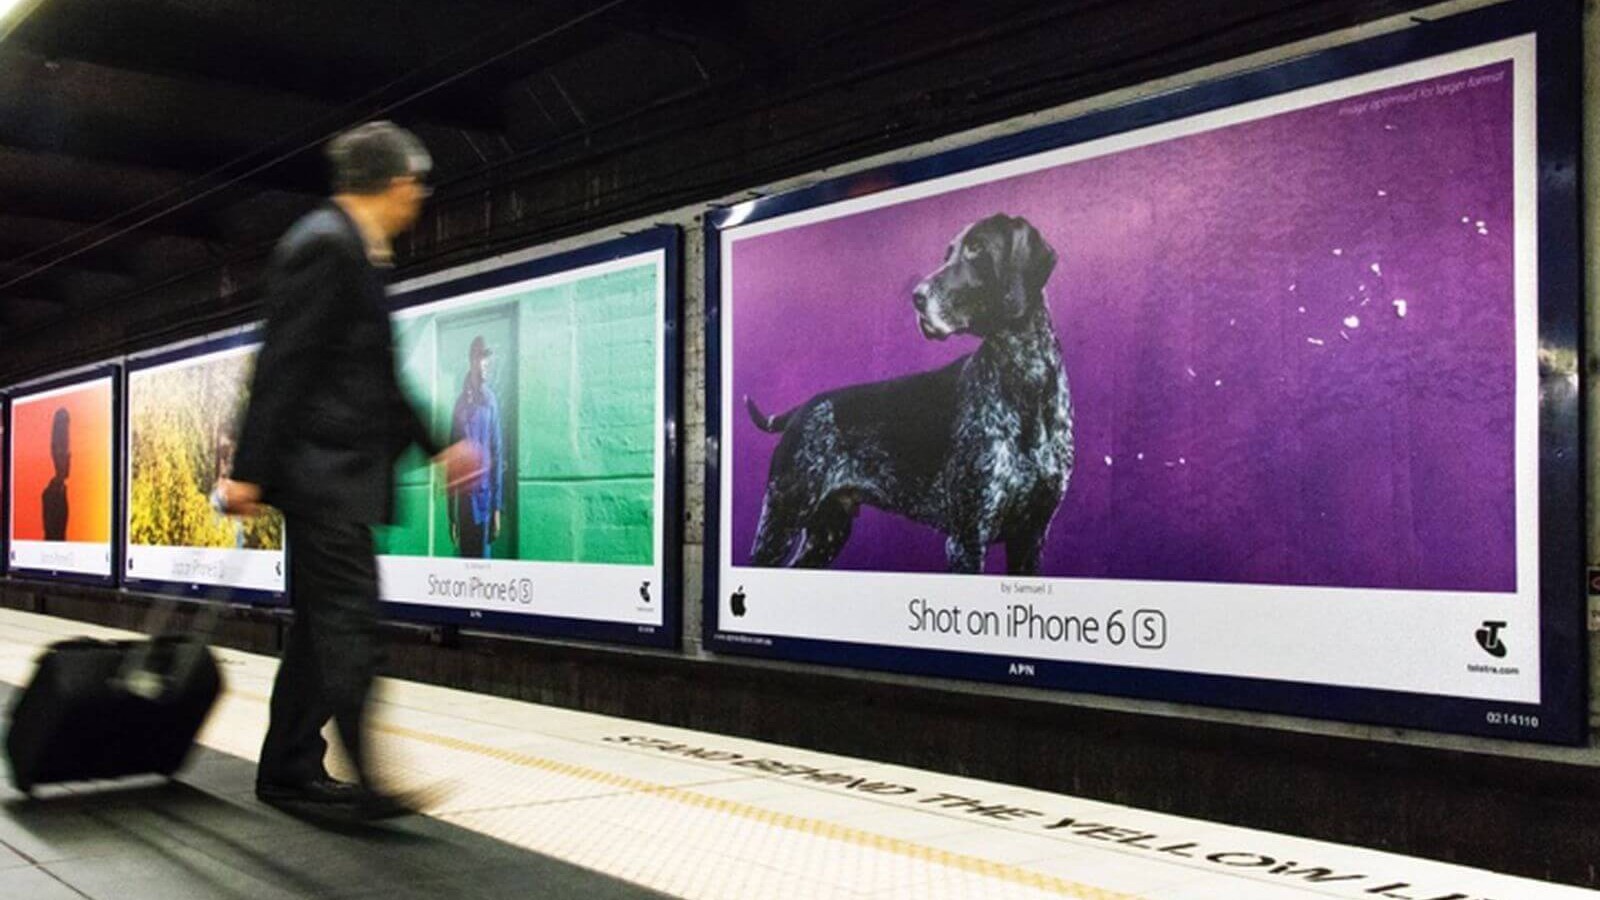 Apple Shot on iPhone Campaign